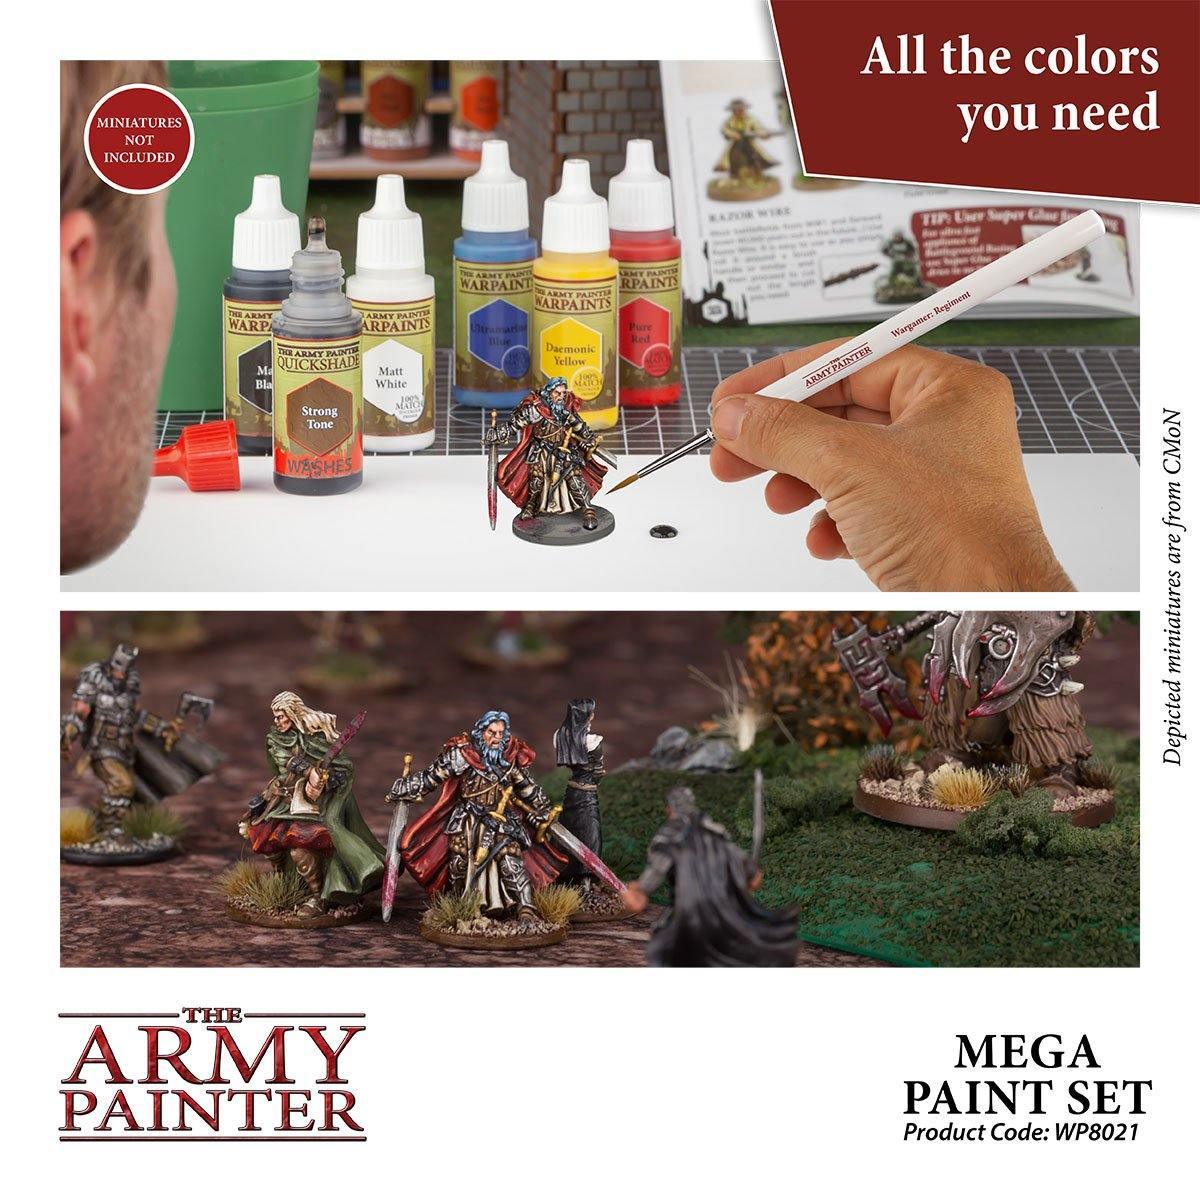 The Army Painter Warpaints Hobby Set - Model Tool Kit & Acrylic Paint Set  for Miniatures - Includes 3 Hobby Brushes, 10 Miniature Acrylic Paints